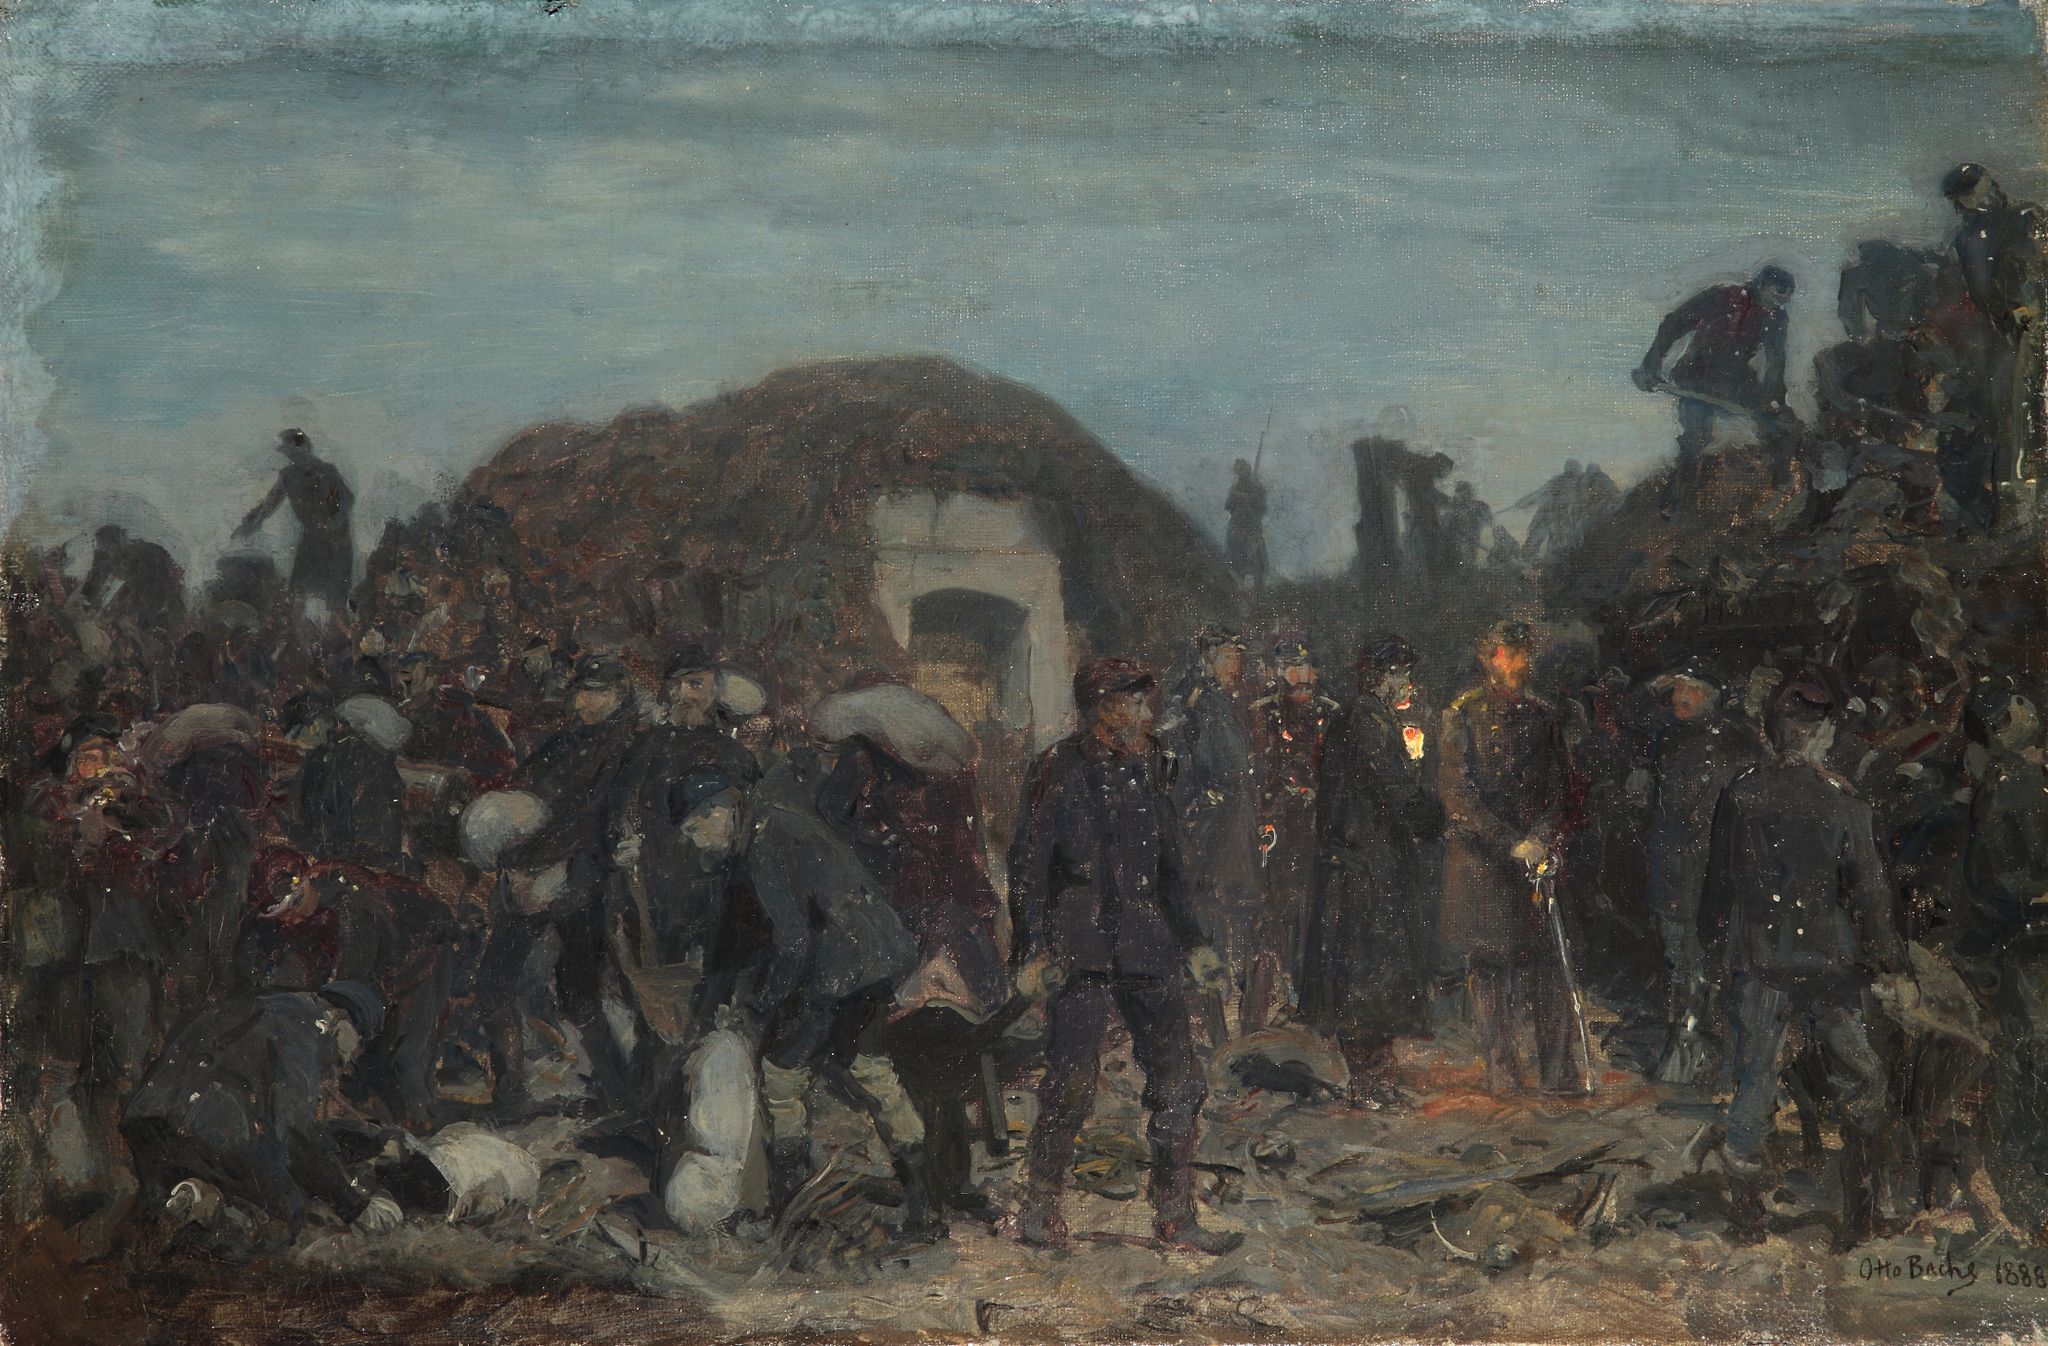 King Christian IX’s visit to Dybbøl Redoubts on the night between 22 and 23 March 1864